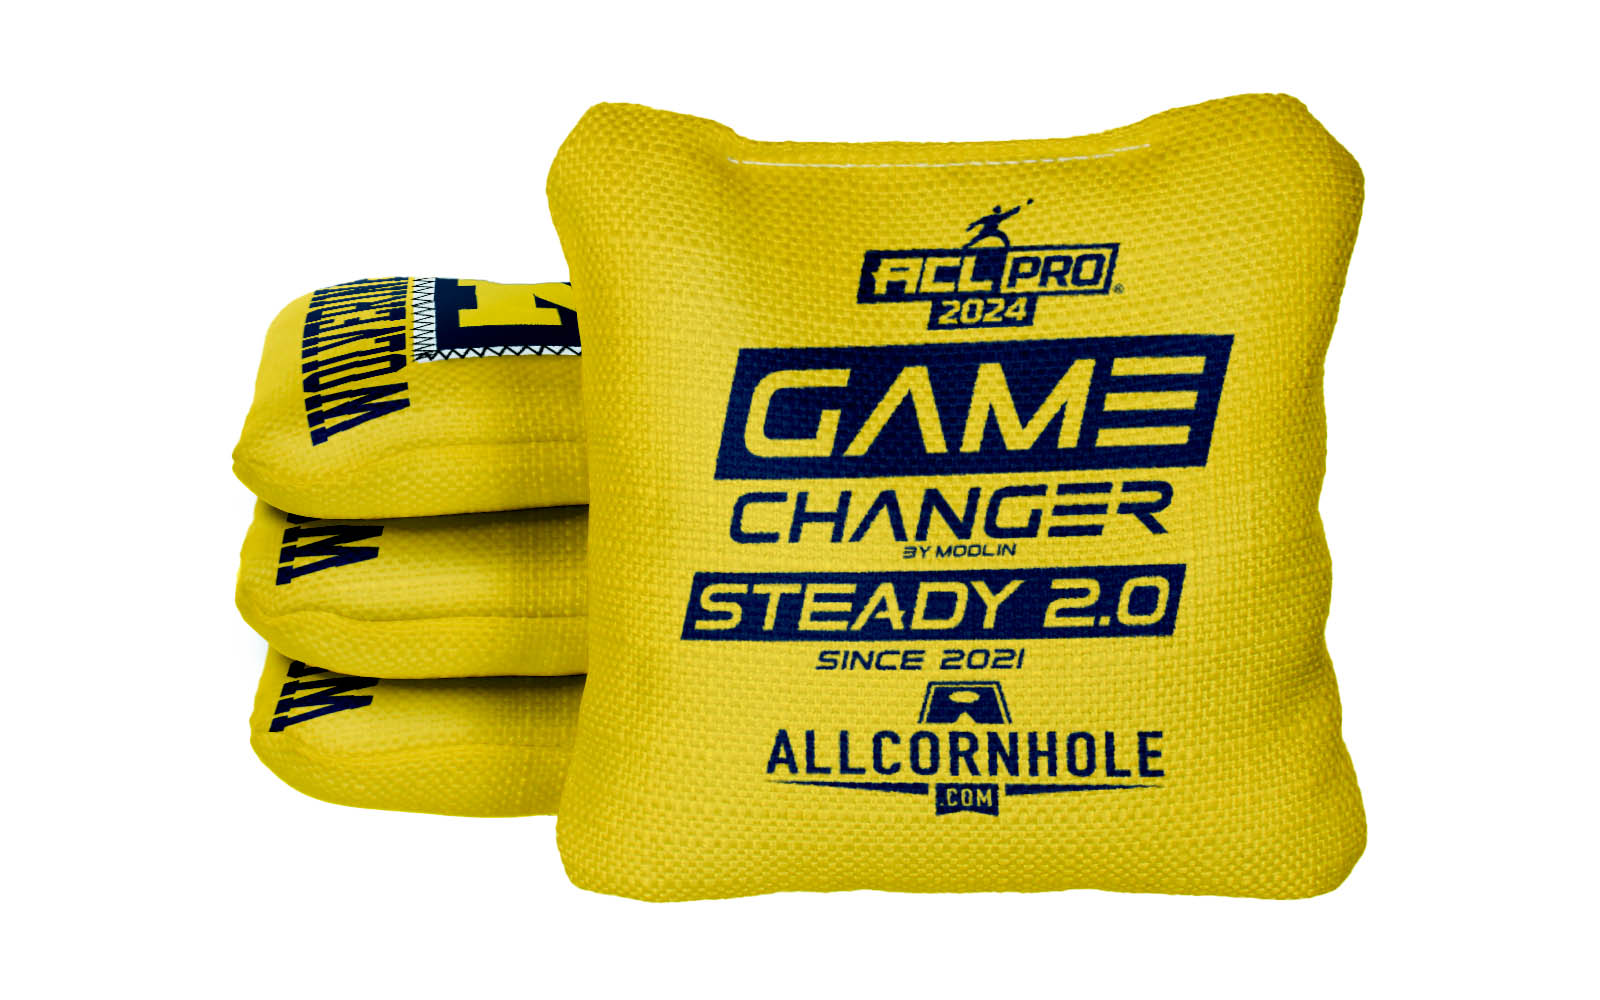 Officially Licensed Collegiate Cornhole Bags - AllCornhole Game Changers Steady 2.0 - Set of 4 - University of Michigan